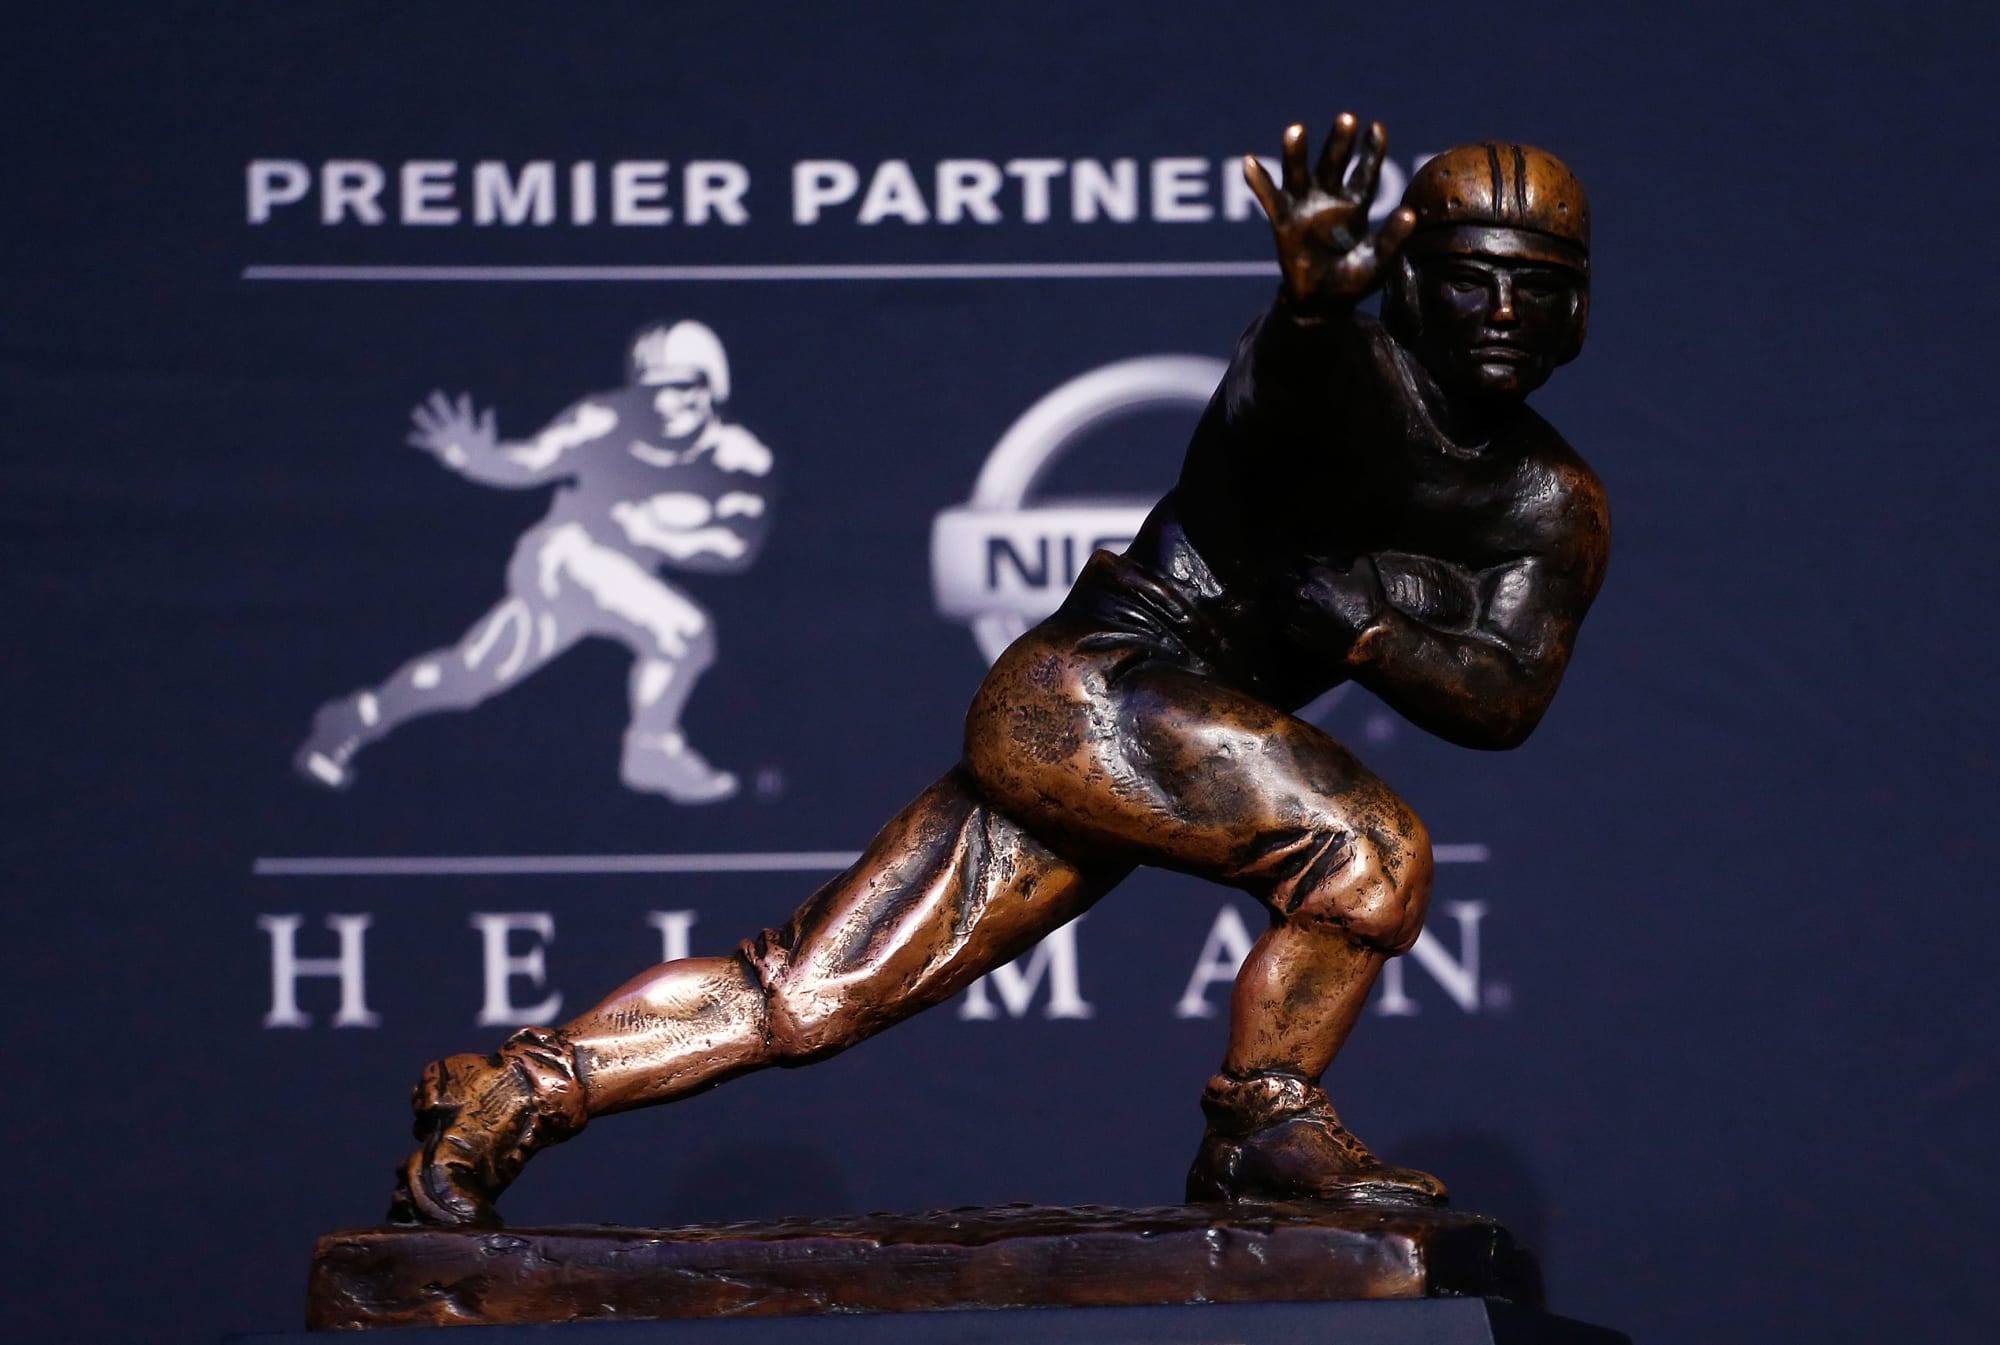 What time will the 2021 Heisman Trophy be awarded?